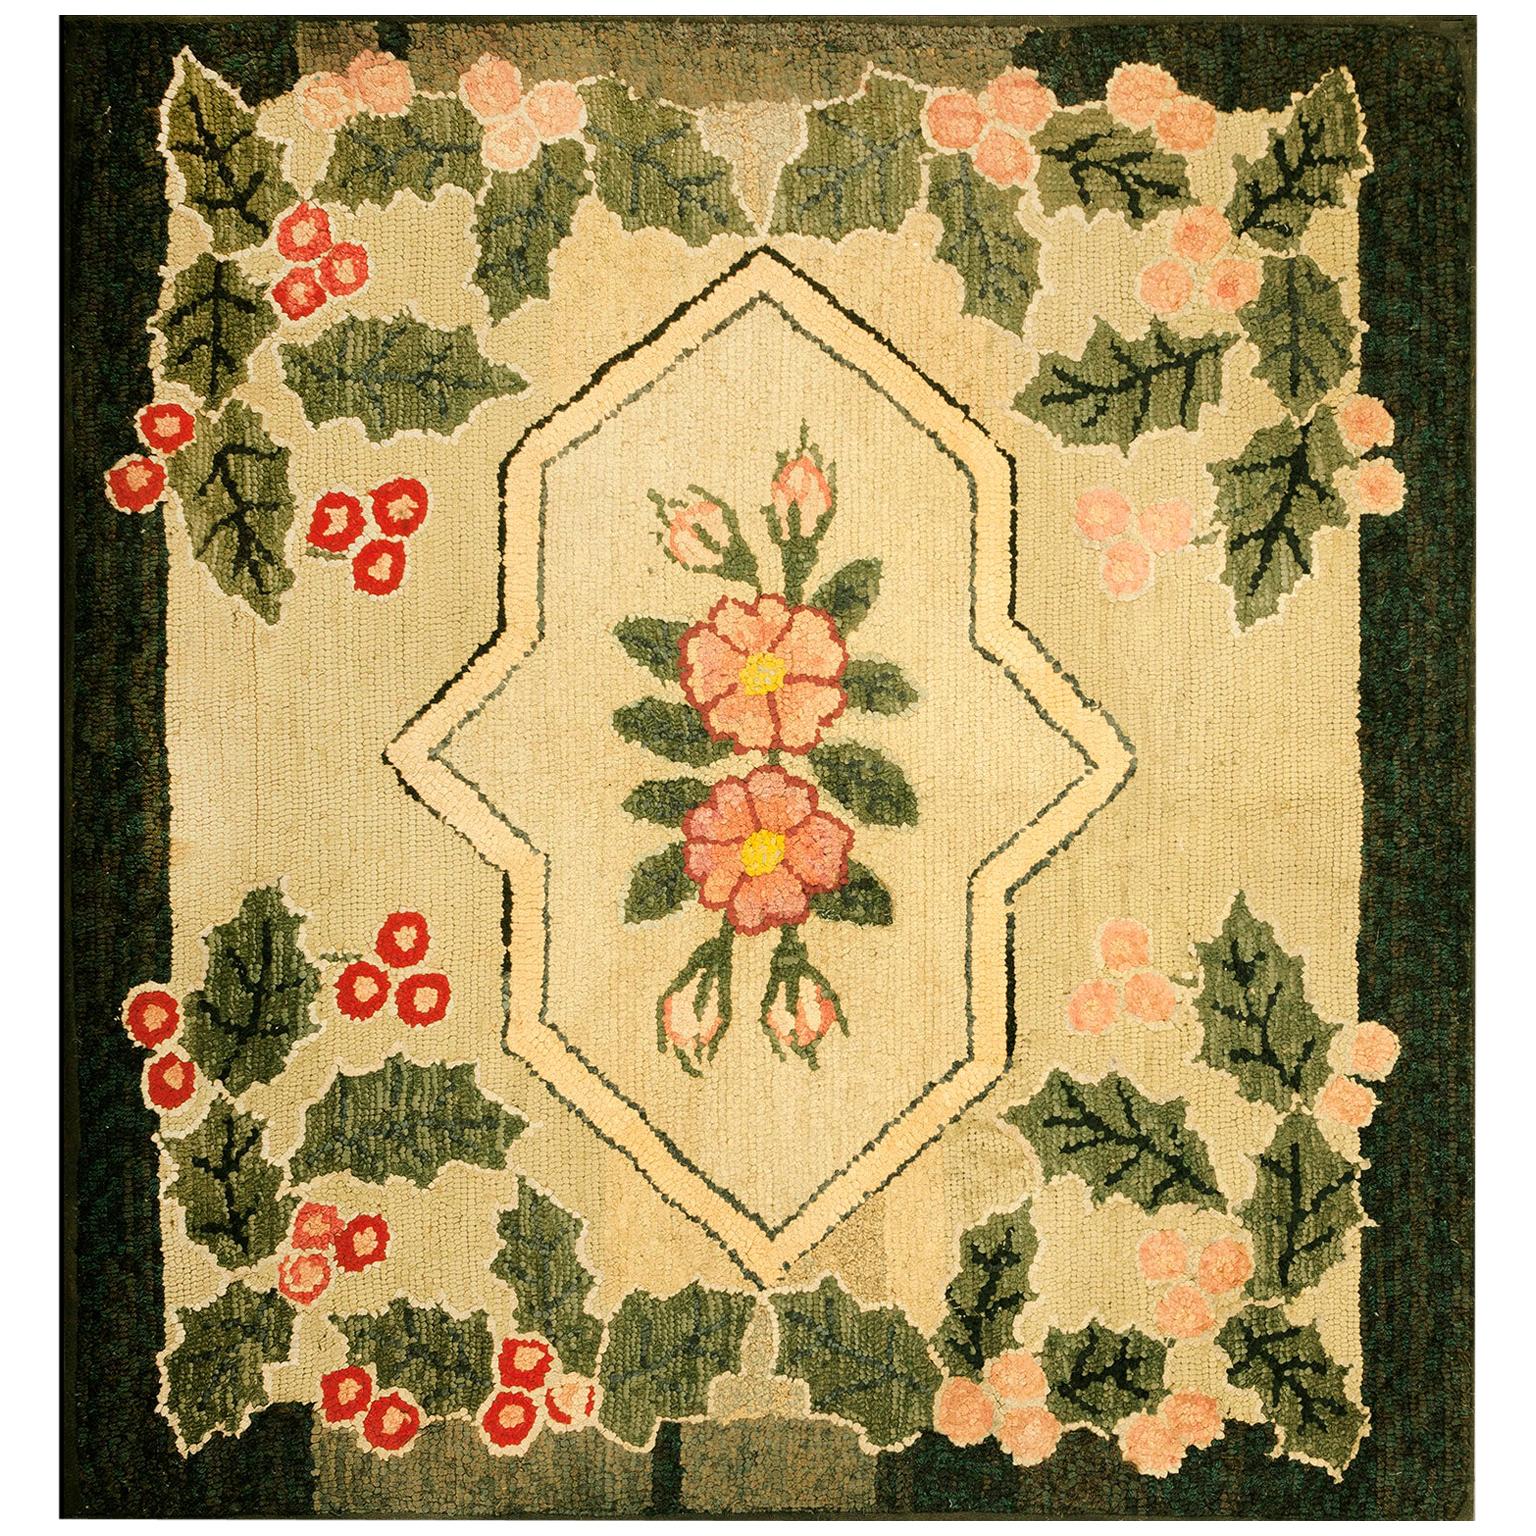 Early 20th Century American Hooked Rug ( 3' 1" x 3' 3" - 94 x 99 cm ) For Sale